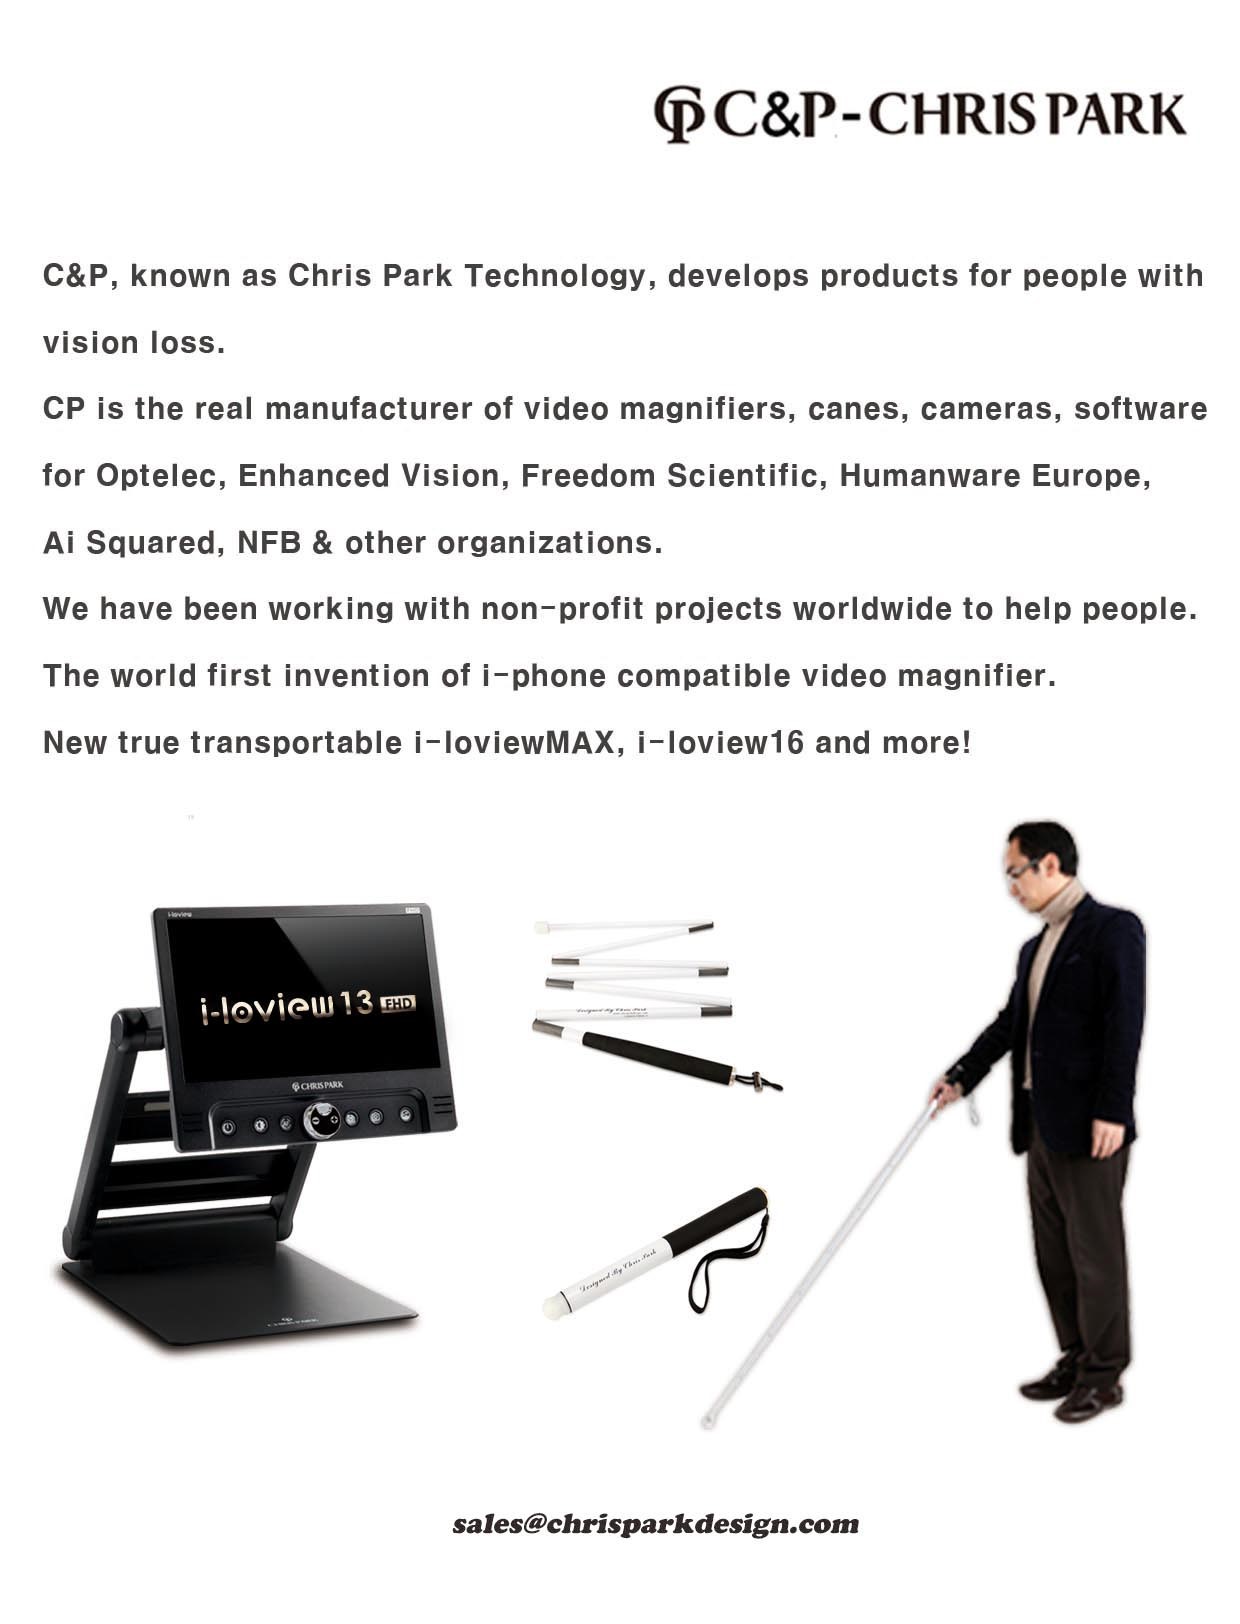 C&P, known as Chris Park Technology, develops products for people with vision loss. C&P is the real manufacturer of video magnifiers, canes, cameras, software for Optelec, Enhanced Vision, Freedom Scientific, HumanWare Europe, Ai Squared, NFB, & other organizations. We have been working with non-profit projects worldwide to help people. The world first invention of iphone compatible video magnifier. New true Transportable i-loviewMAX, iloview16 and more! sales@chrisparkdesign.com 